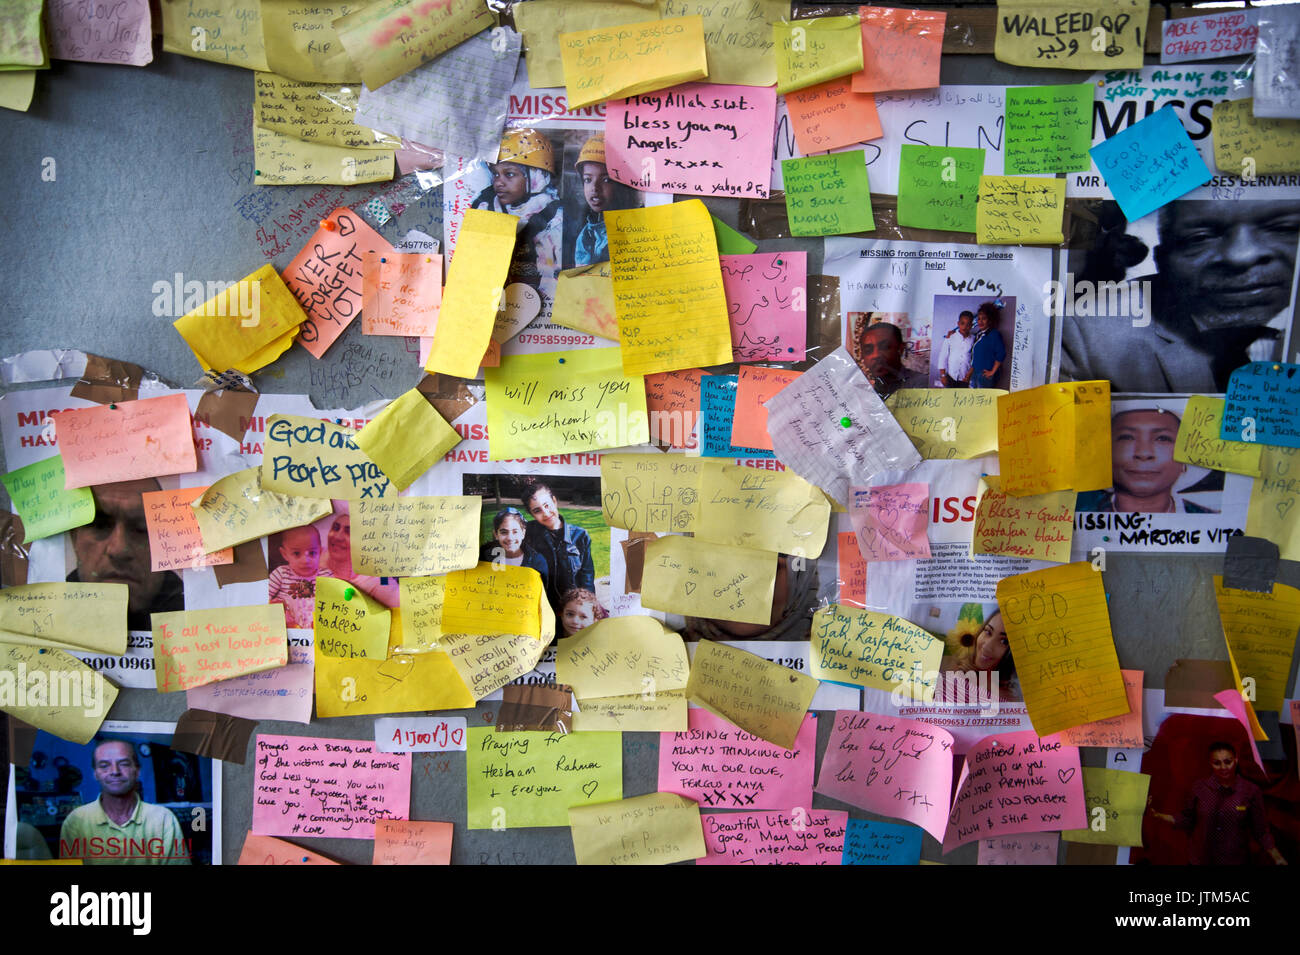 Grenfell Tower, West London. Aftermath of the tragedy. Memorial to victims of the fire with messages and post-it notes Stock Photo